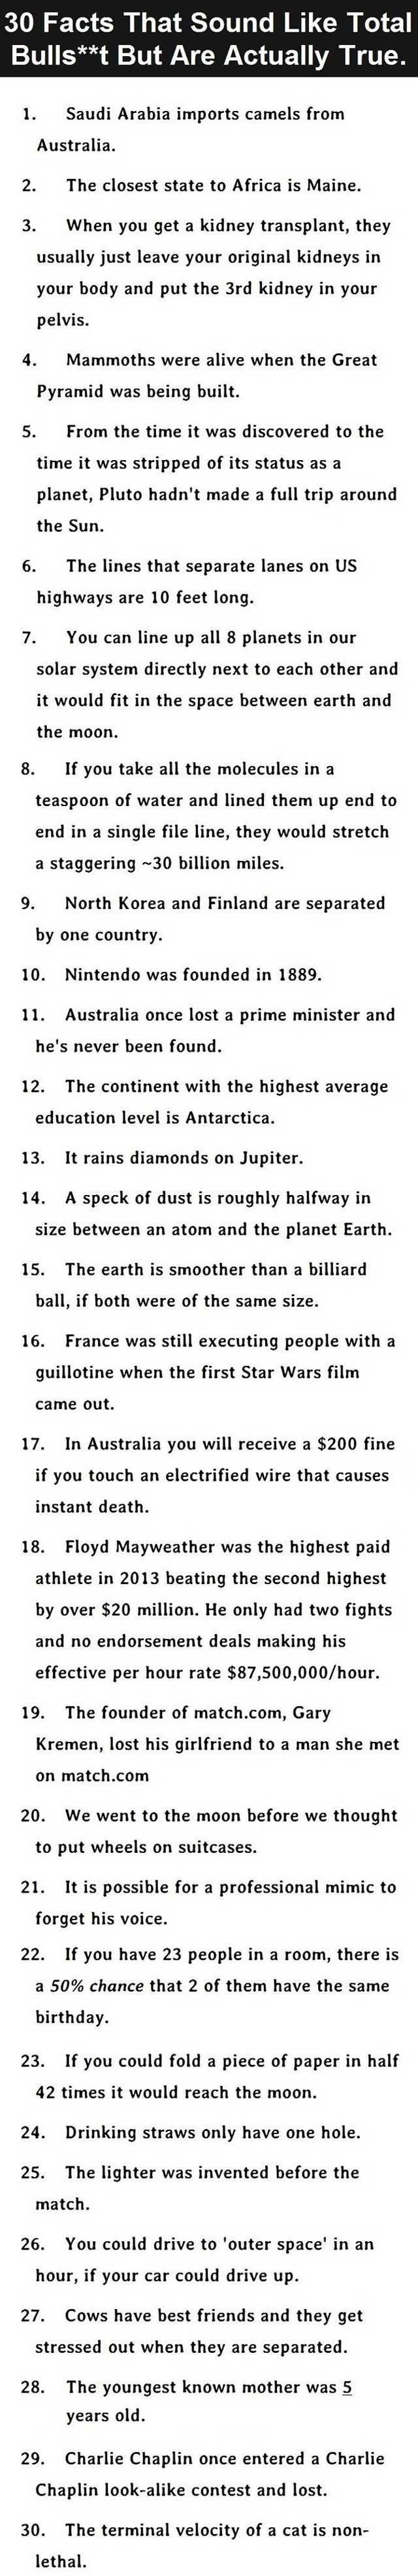 30 actual facts.